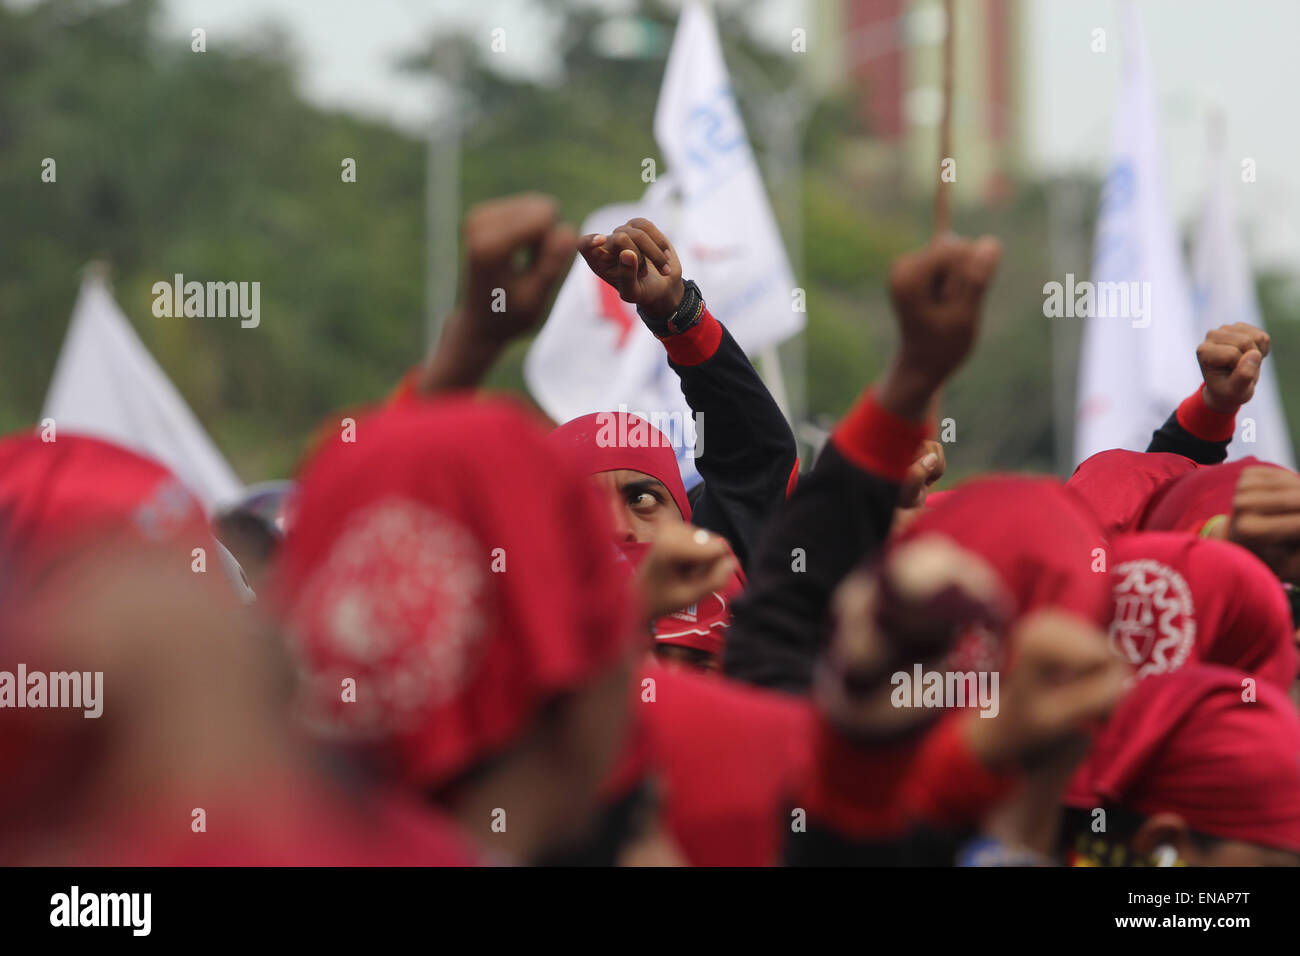 Batam, Kepri, Indonesia. 1st May, 2015. BATAM, INDONESIA - MAY 01: Indonesia labours action demanding an increase on welfare, health and remove emplyment contarcts during International Labour Day called May Day on Mei 01, 2015 in Batam, Indonesia. Credit:  Sijori Images/ZUMA Wire/Alamy Live News Stock Photo